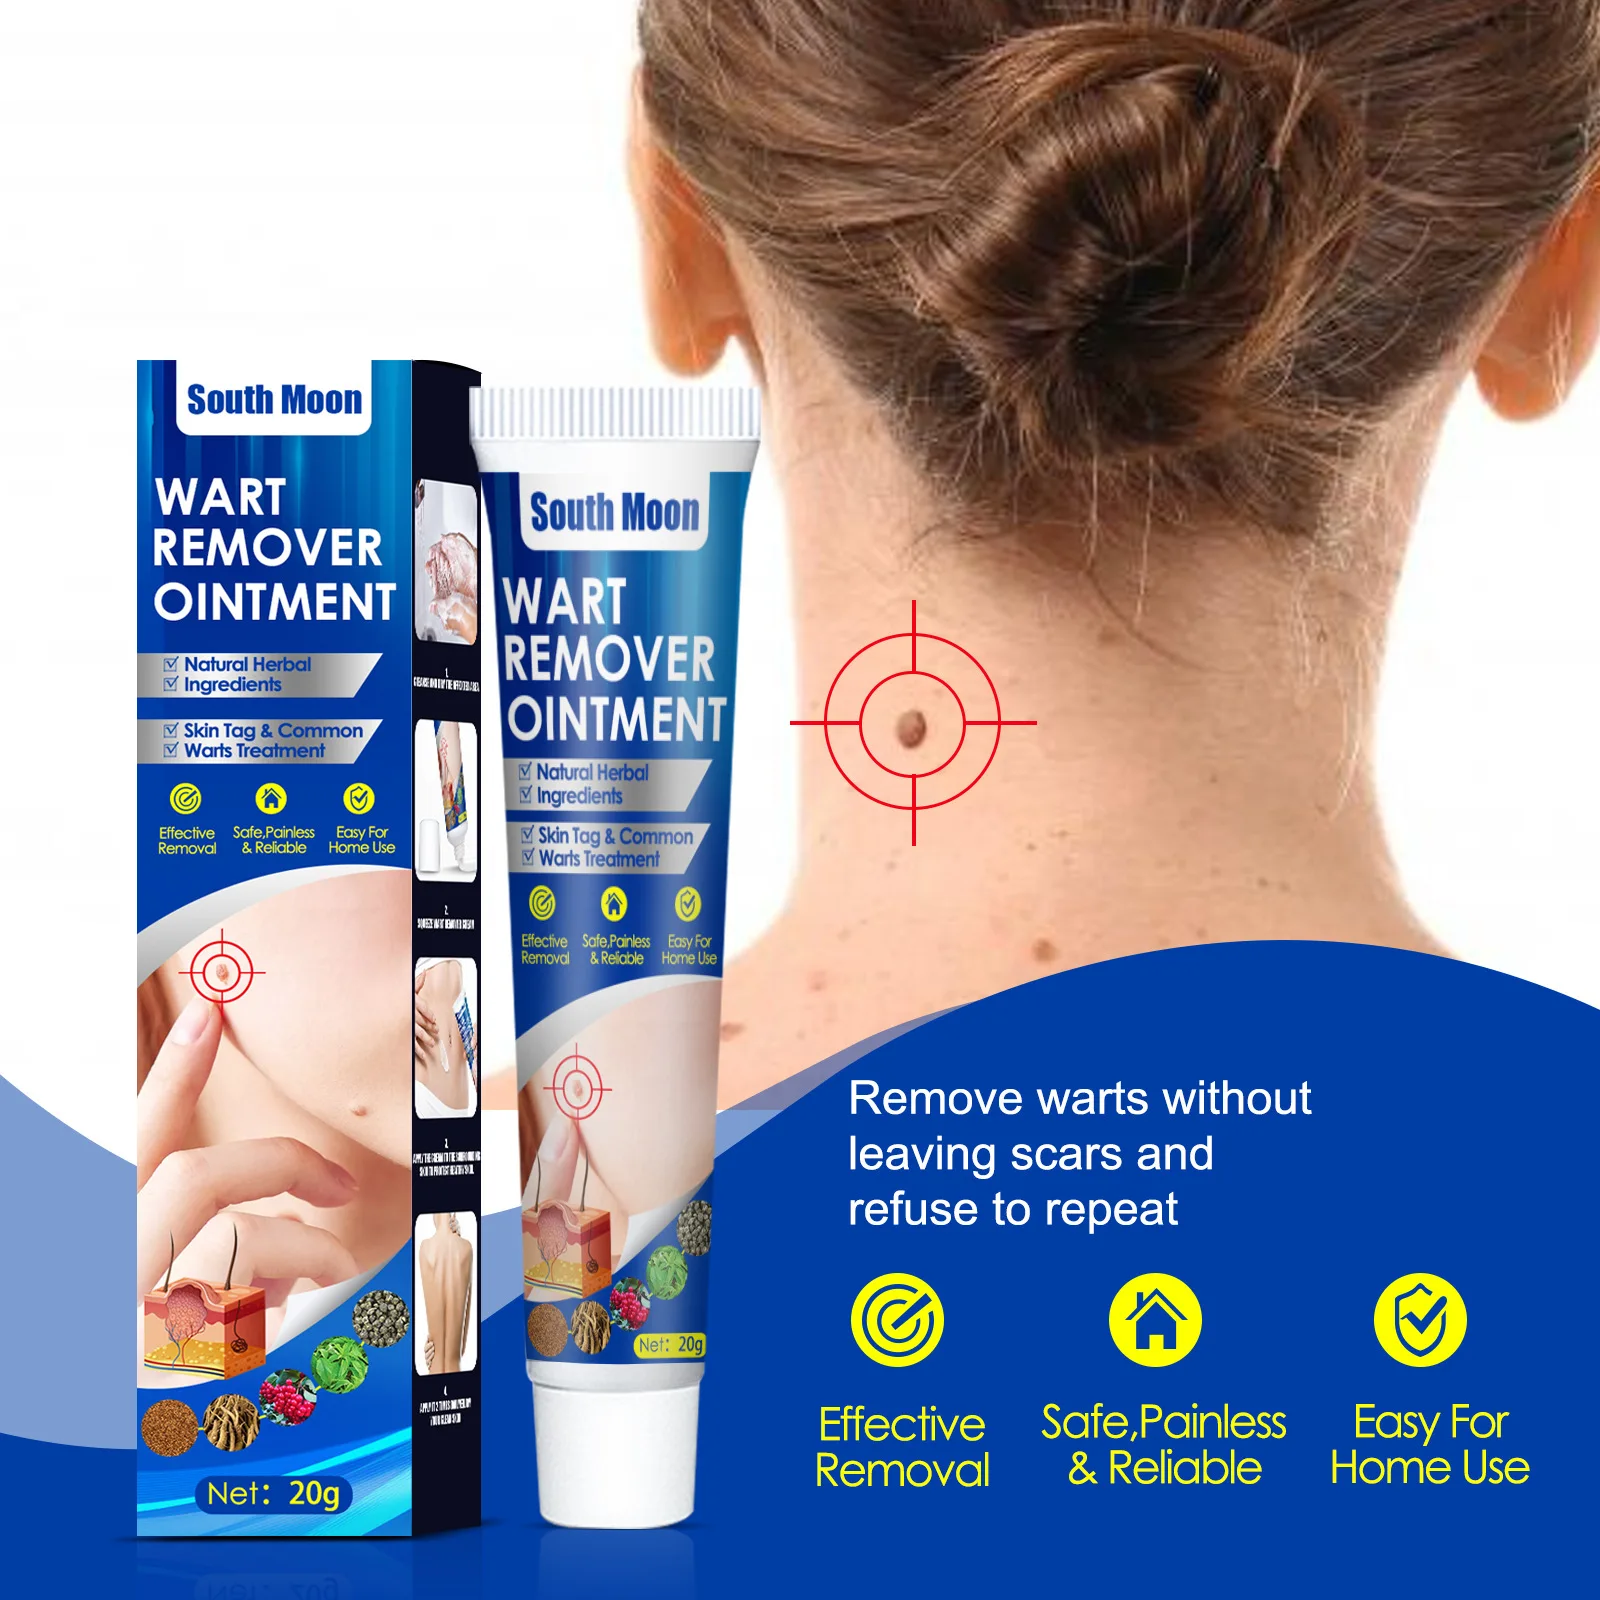 

Warts Remover Ointment Antibacterial Wart Treatment Cream Skin Tags Removing Herbal Extract Corn Medical Plaster